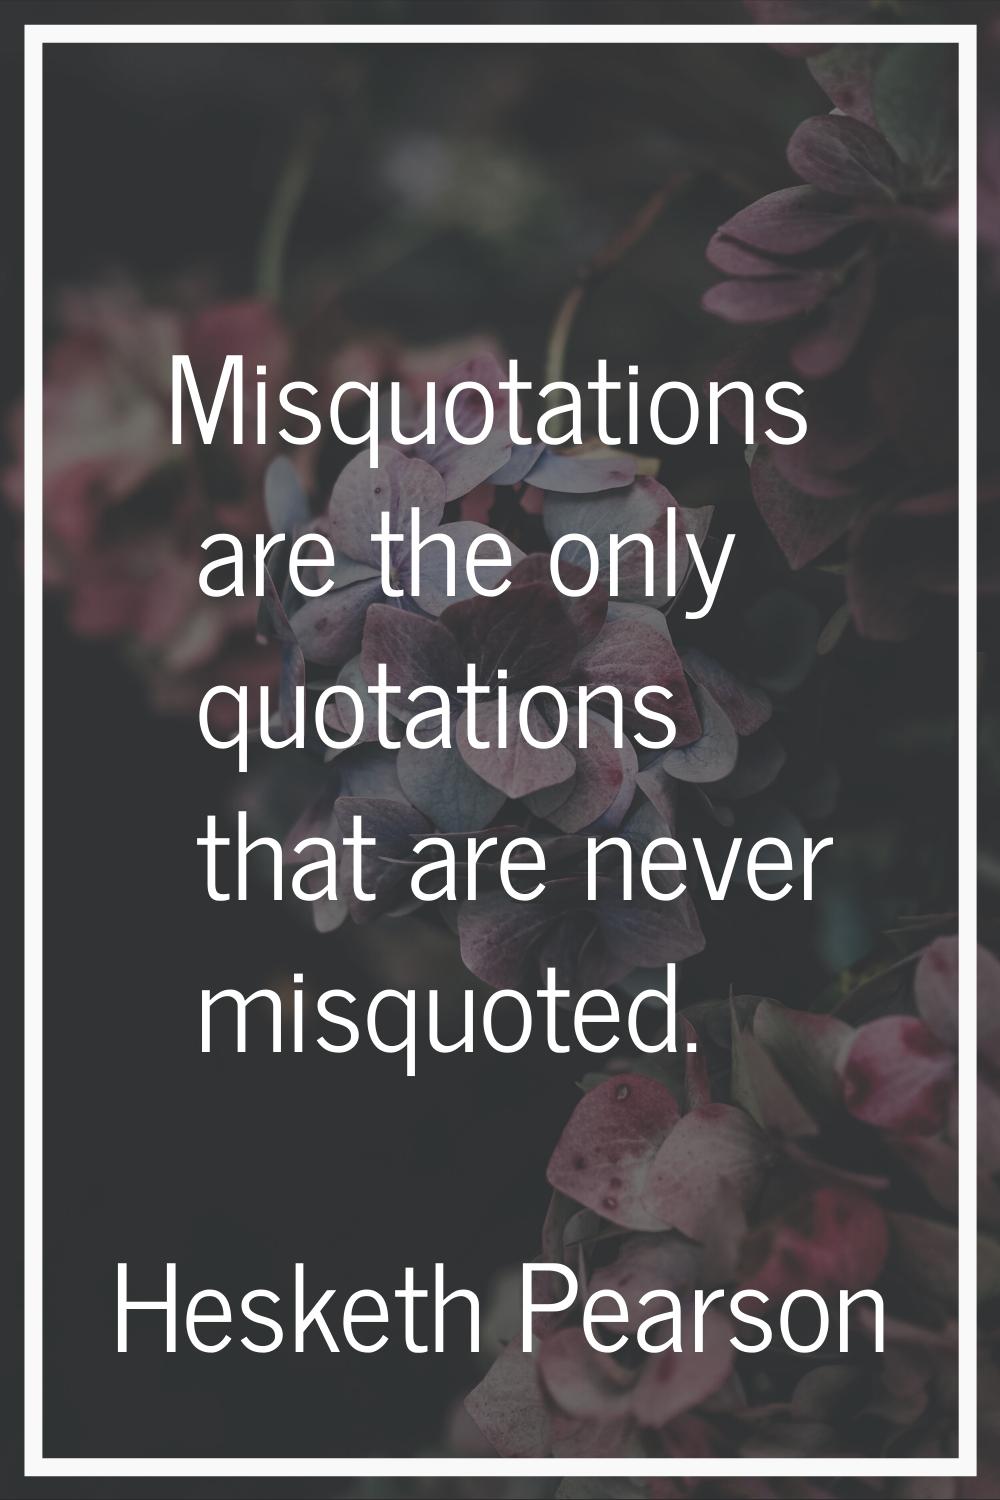 Misquotations are the only quotations that are never misquoted.